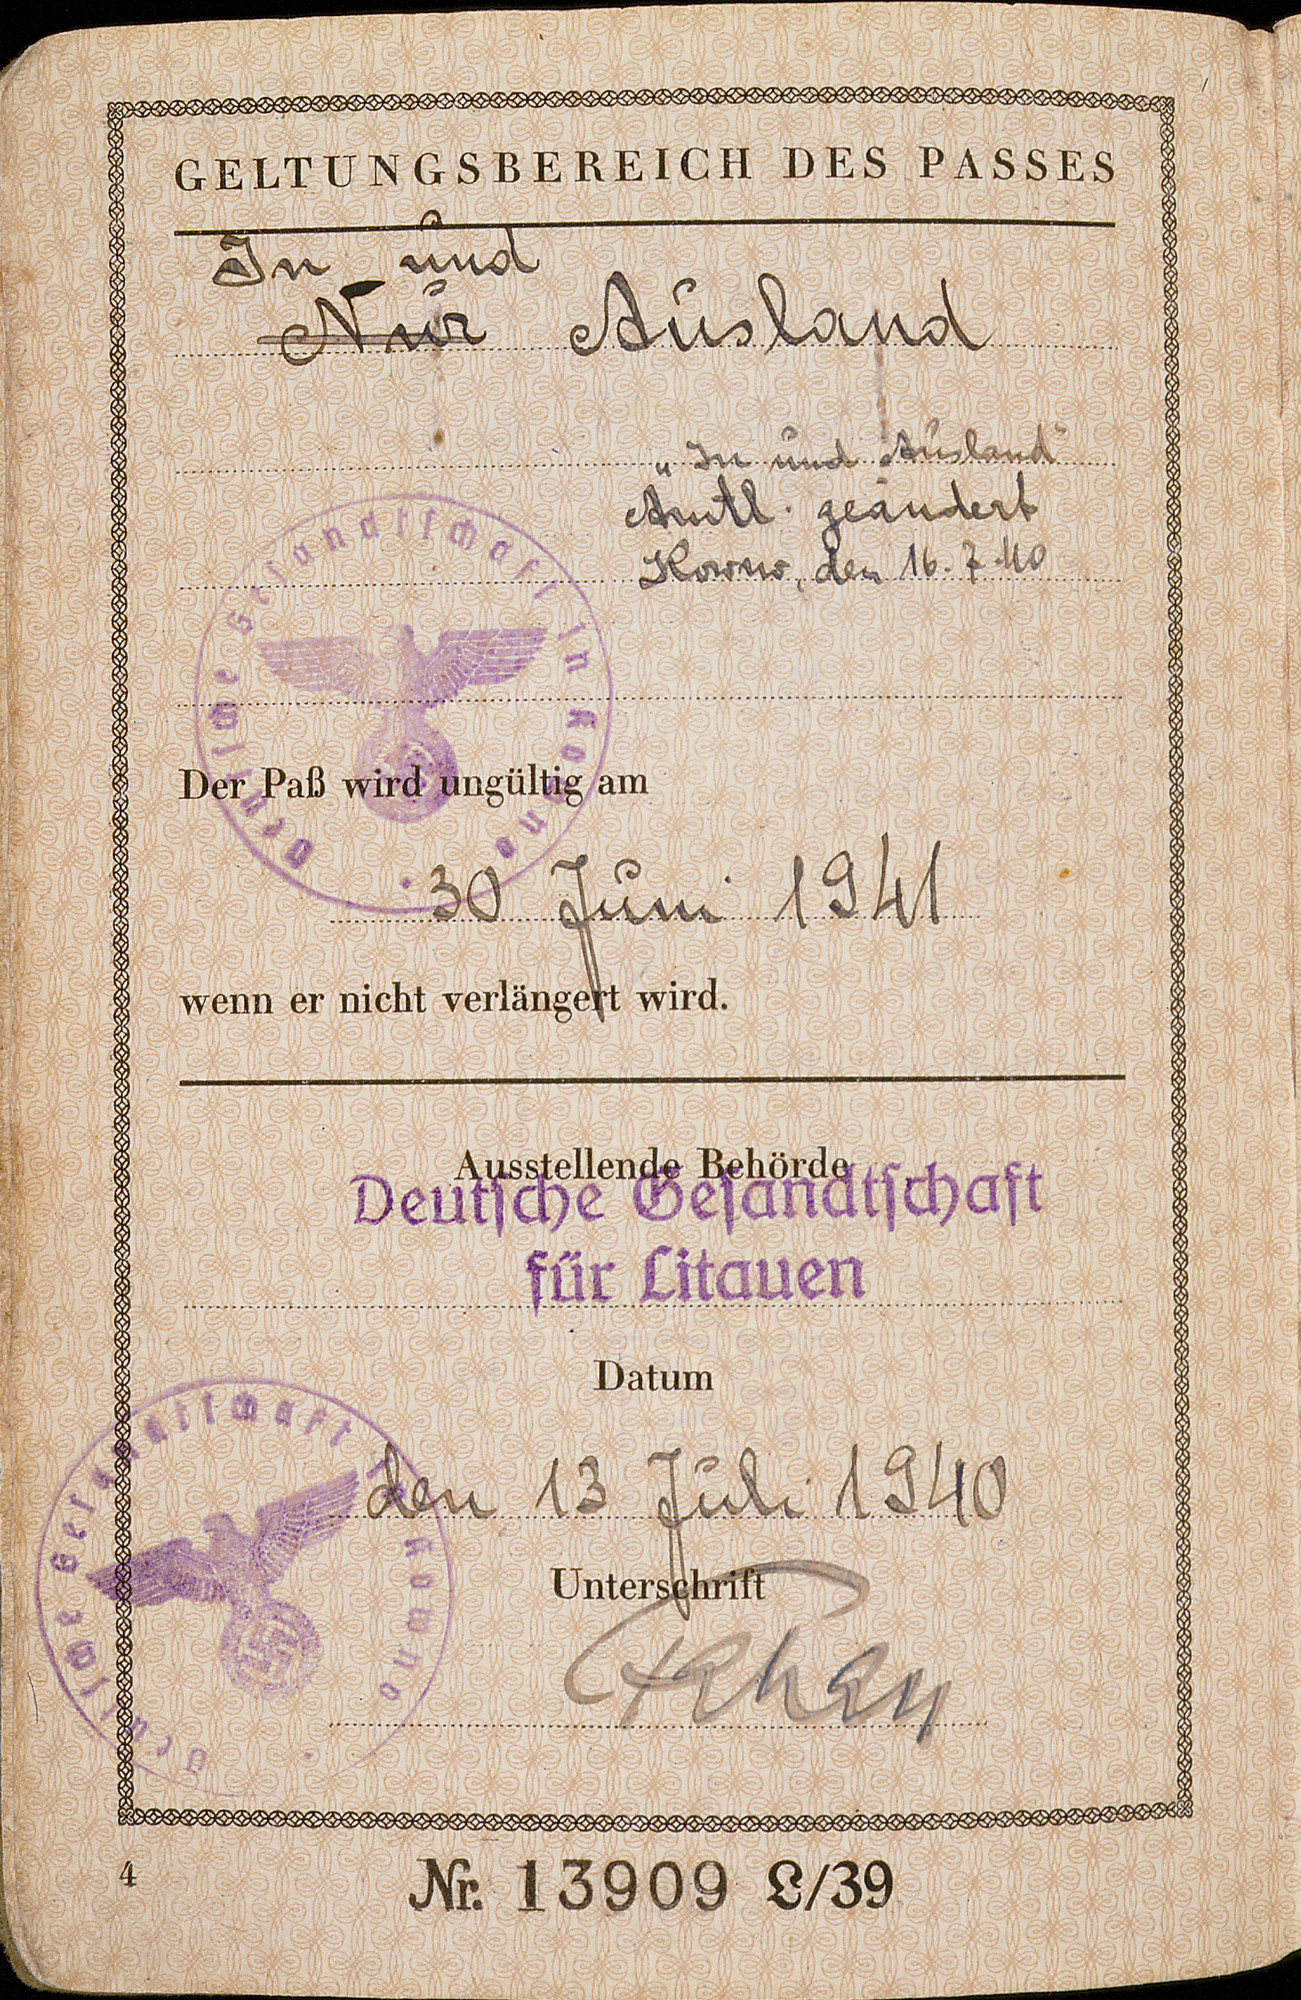 German passport issued to Hanni Sondheimer by the German Consulate in Kovno.

German Jews were commonly required to add "Israel" to their names if male, and "Sara" if female.  Jewish passports were further distinguished by a "J," signifying "Jude" (Jew), stamped in red on the first page.